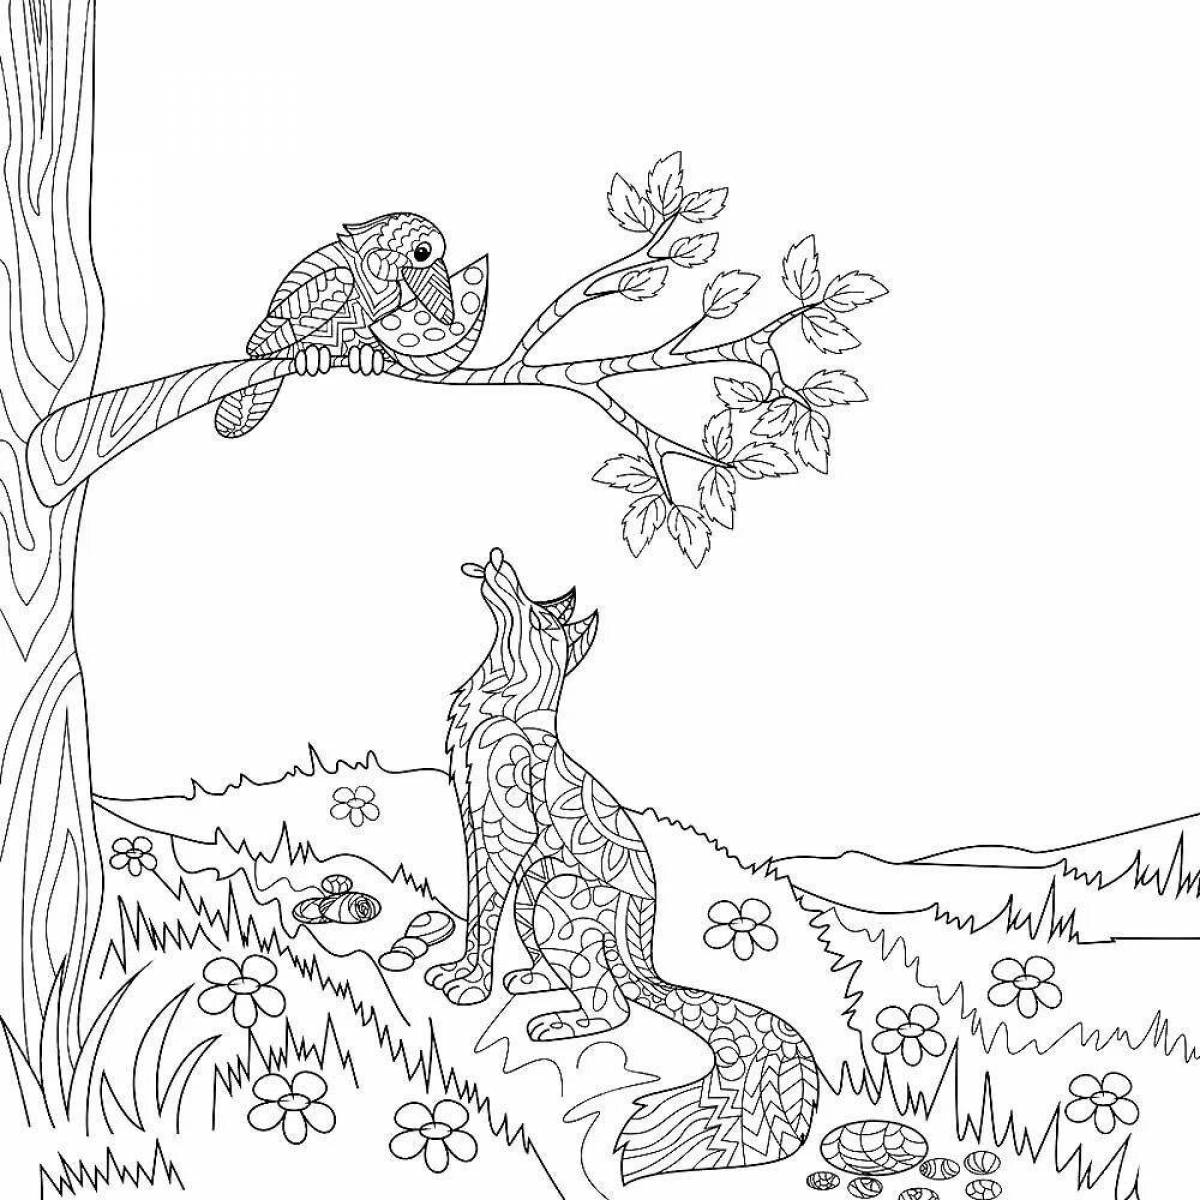 Coloring page calm crow and fox